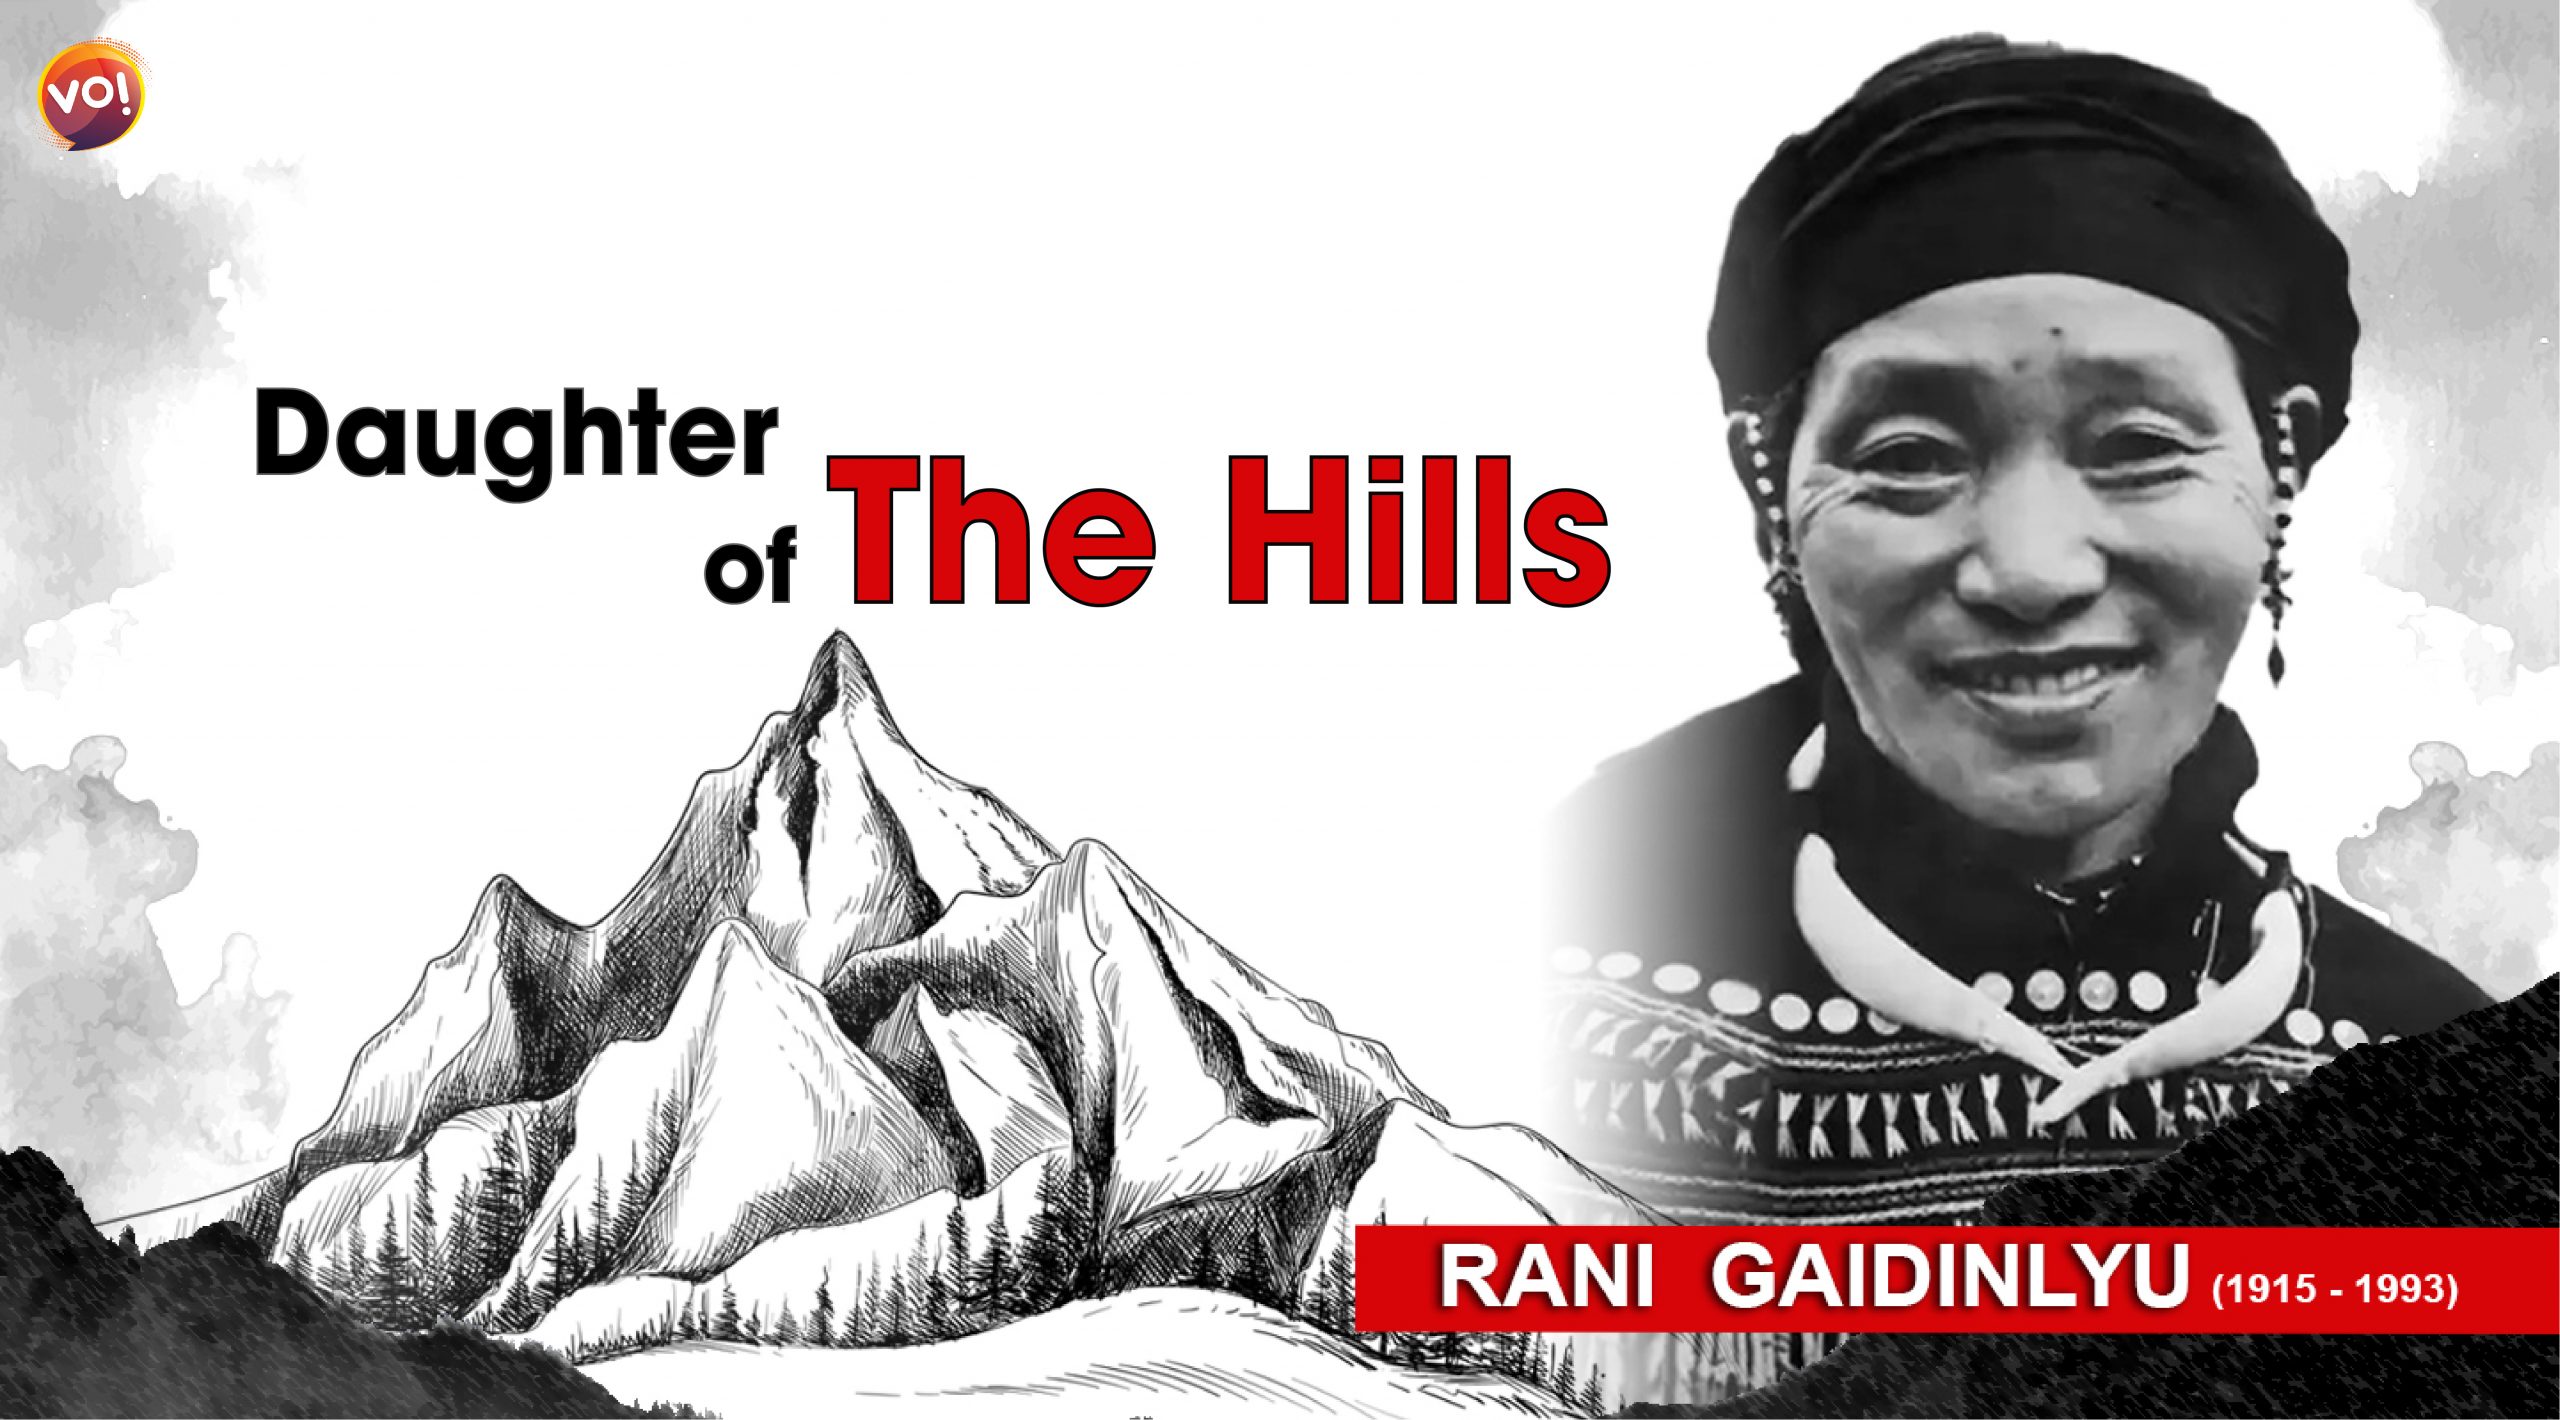 Let's talk about one courageous woman who brought the British to their knees at only 12. Rani Gaidinliu